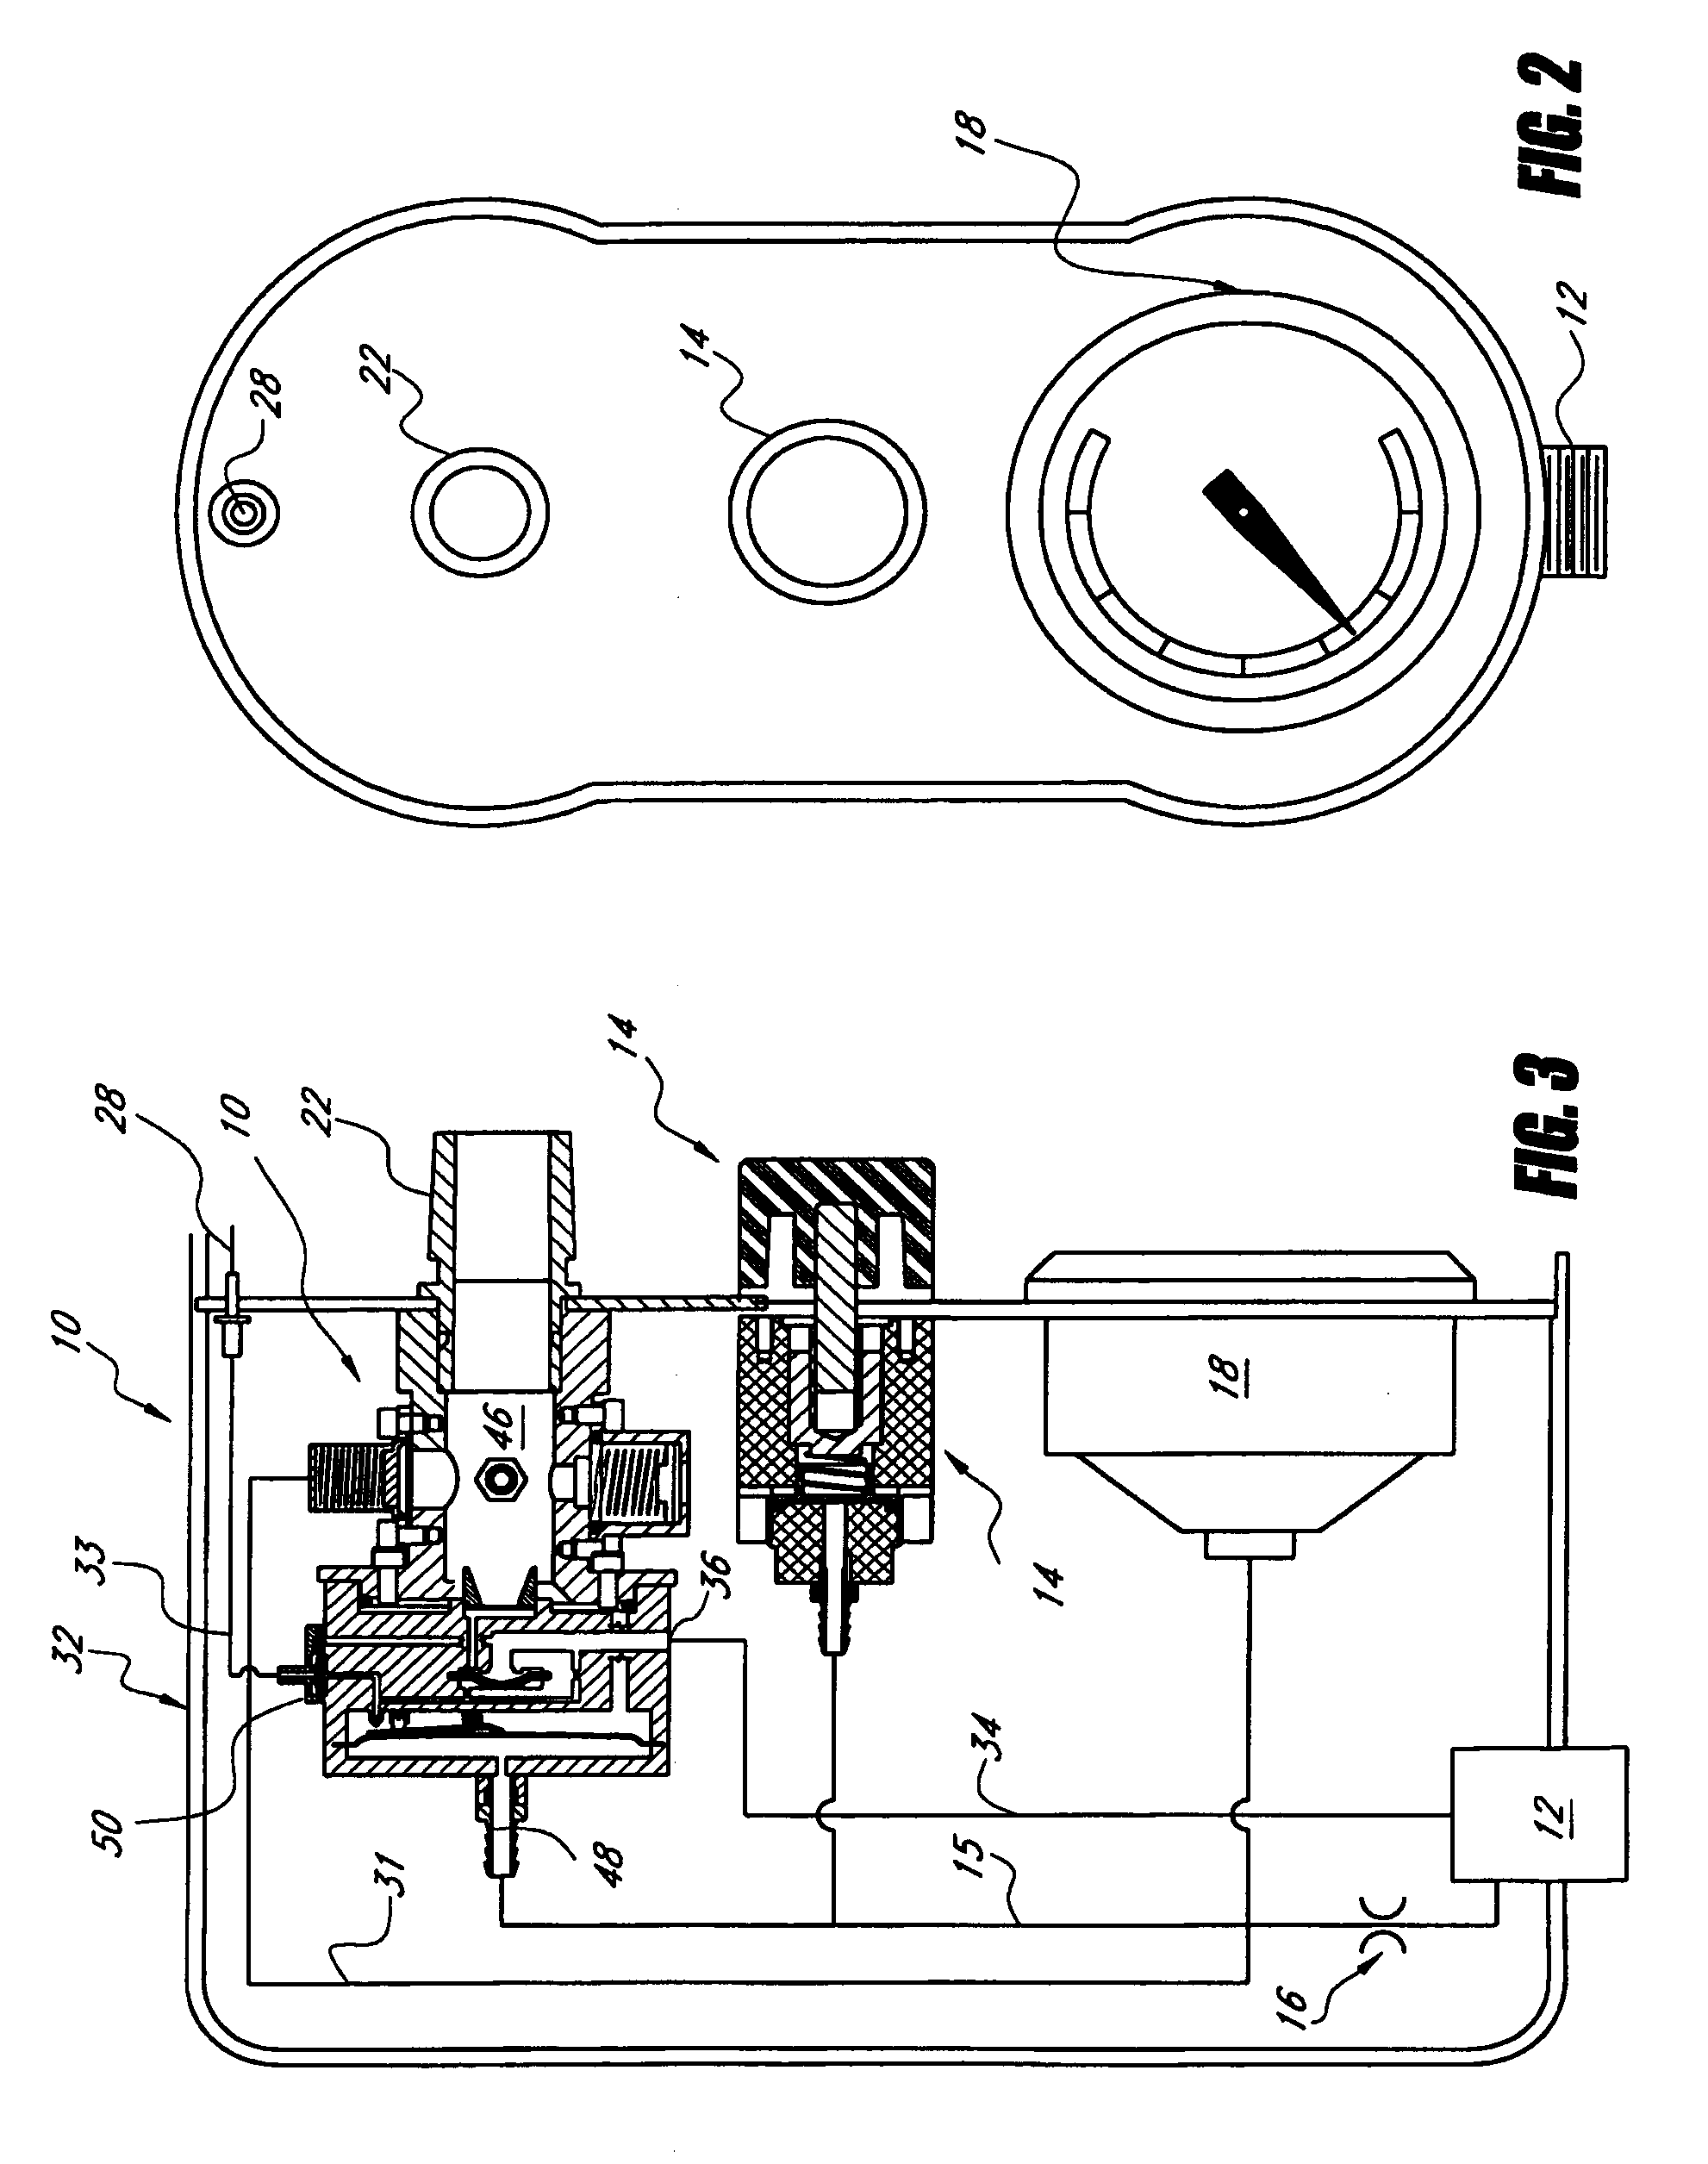 Portable gas powered positive pressure breathing apparatus and method